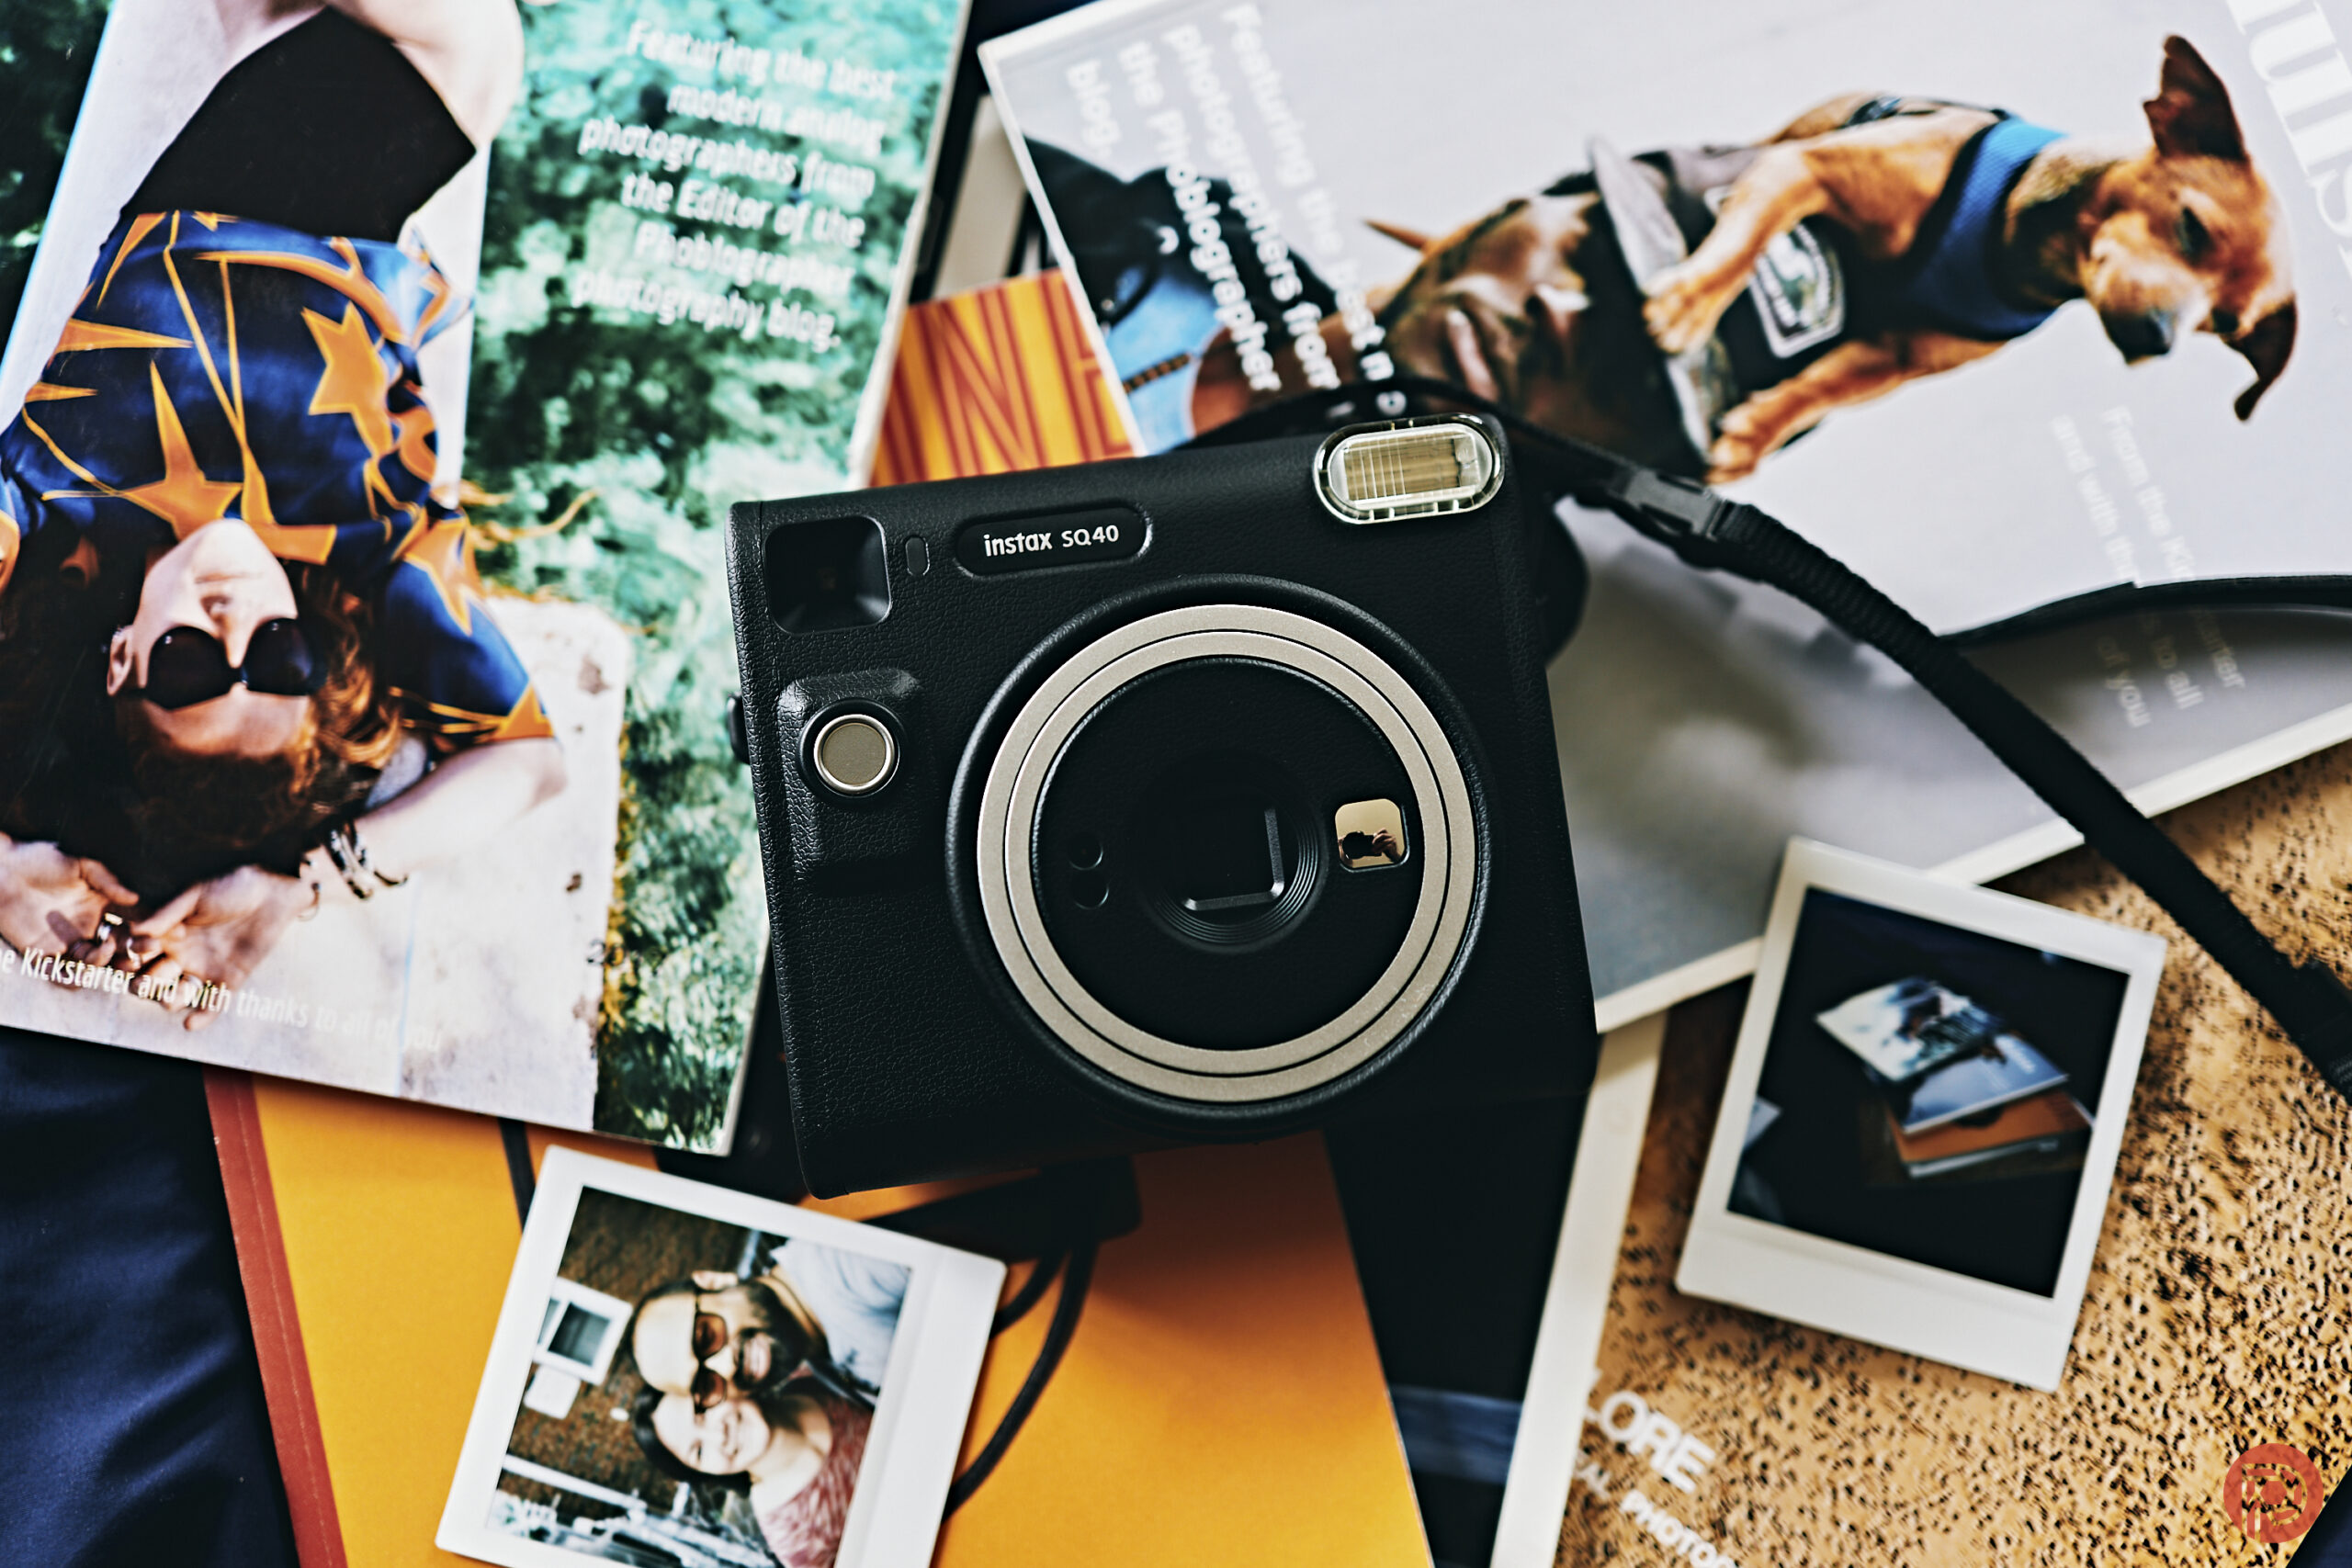 Our Members Can Win a Fujifilm Instax SQ40